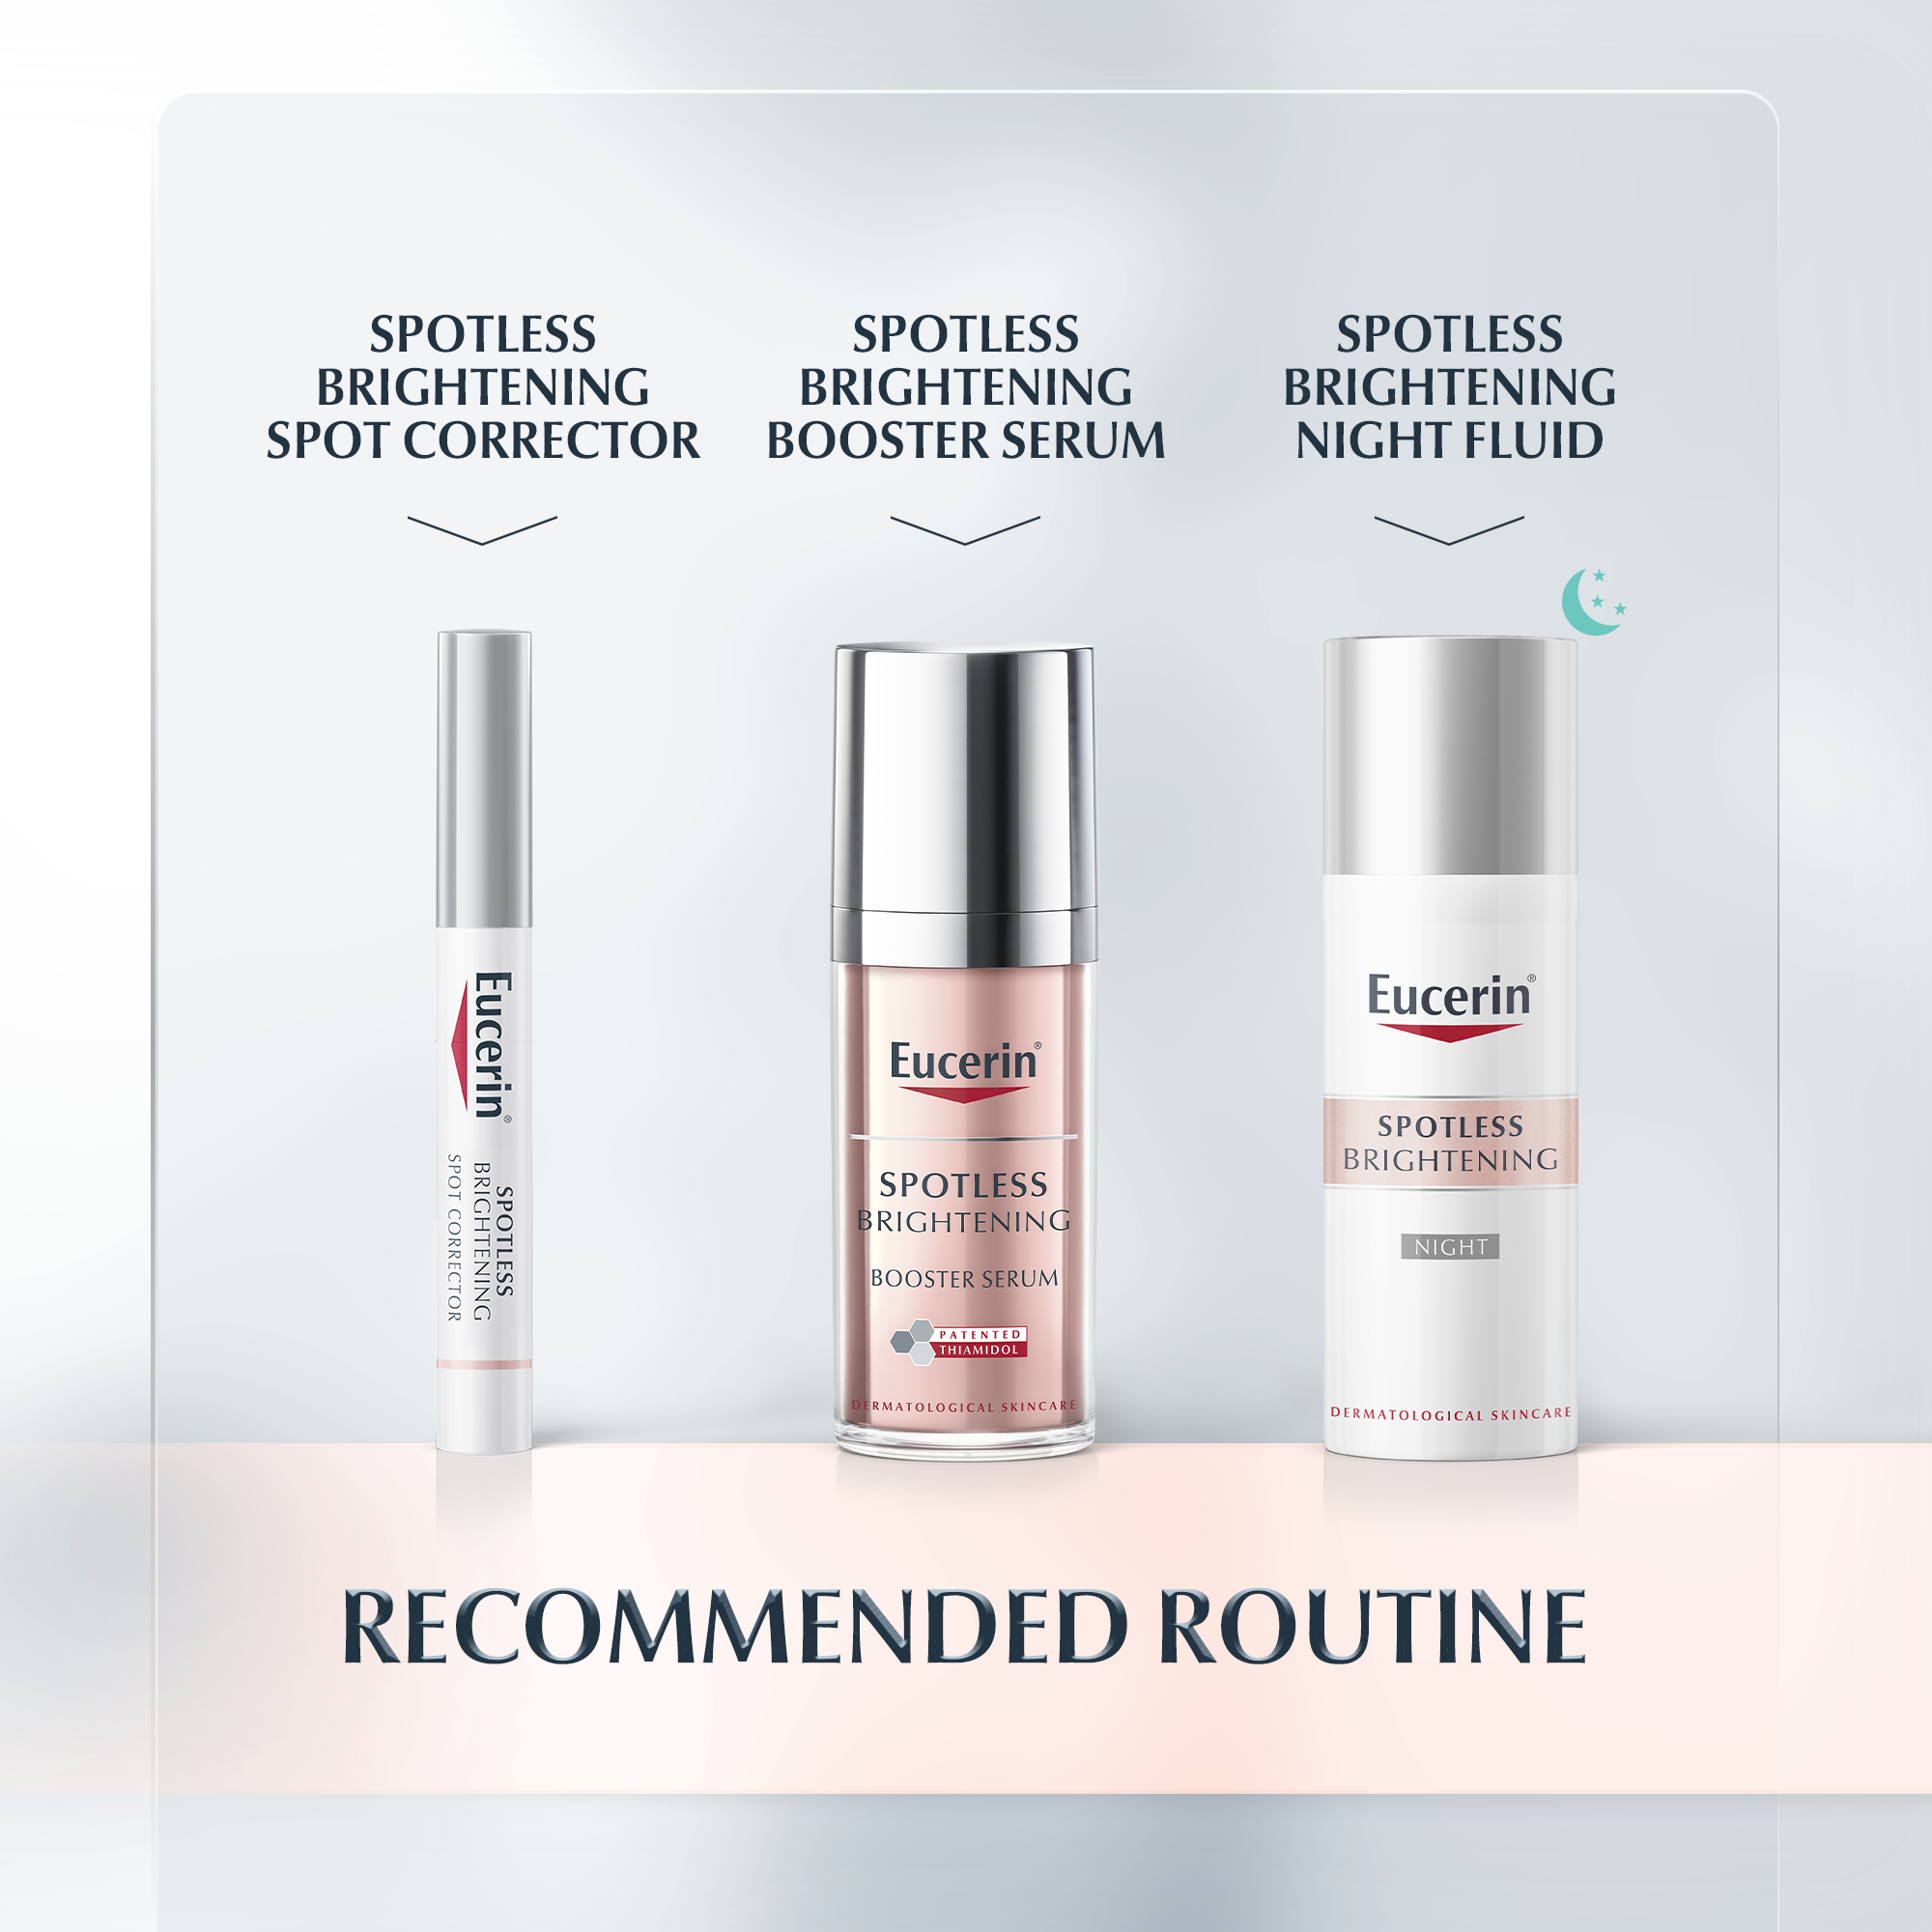 Recommended Routine for Spotless Brightening Day Fluid